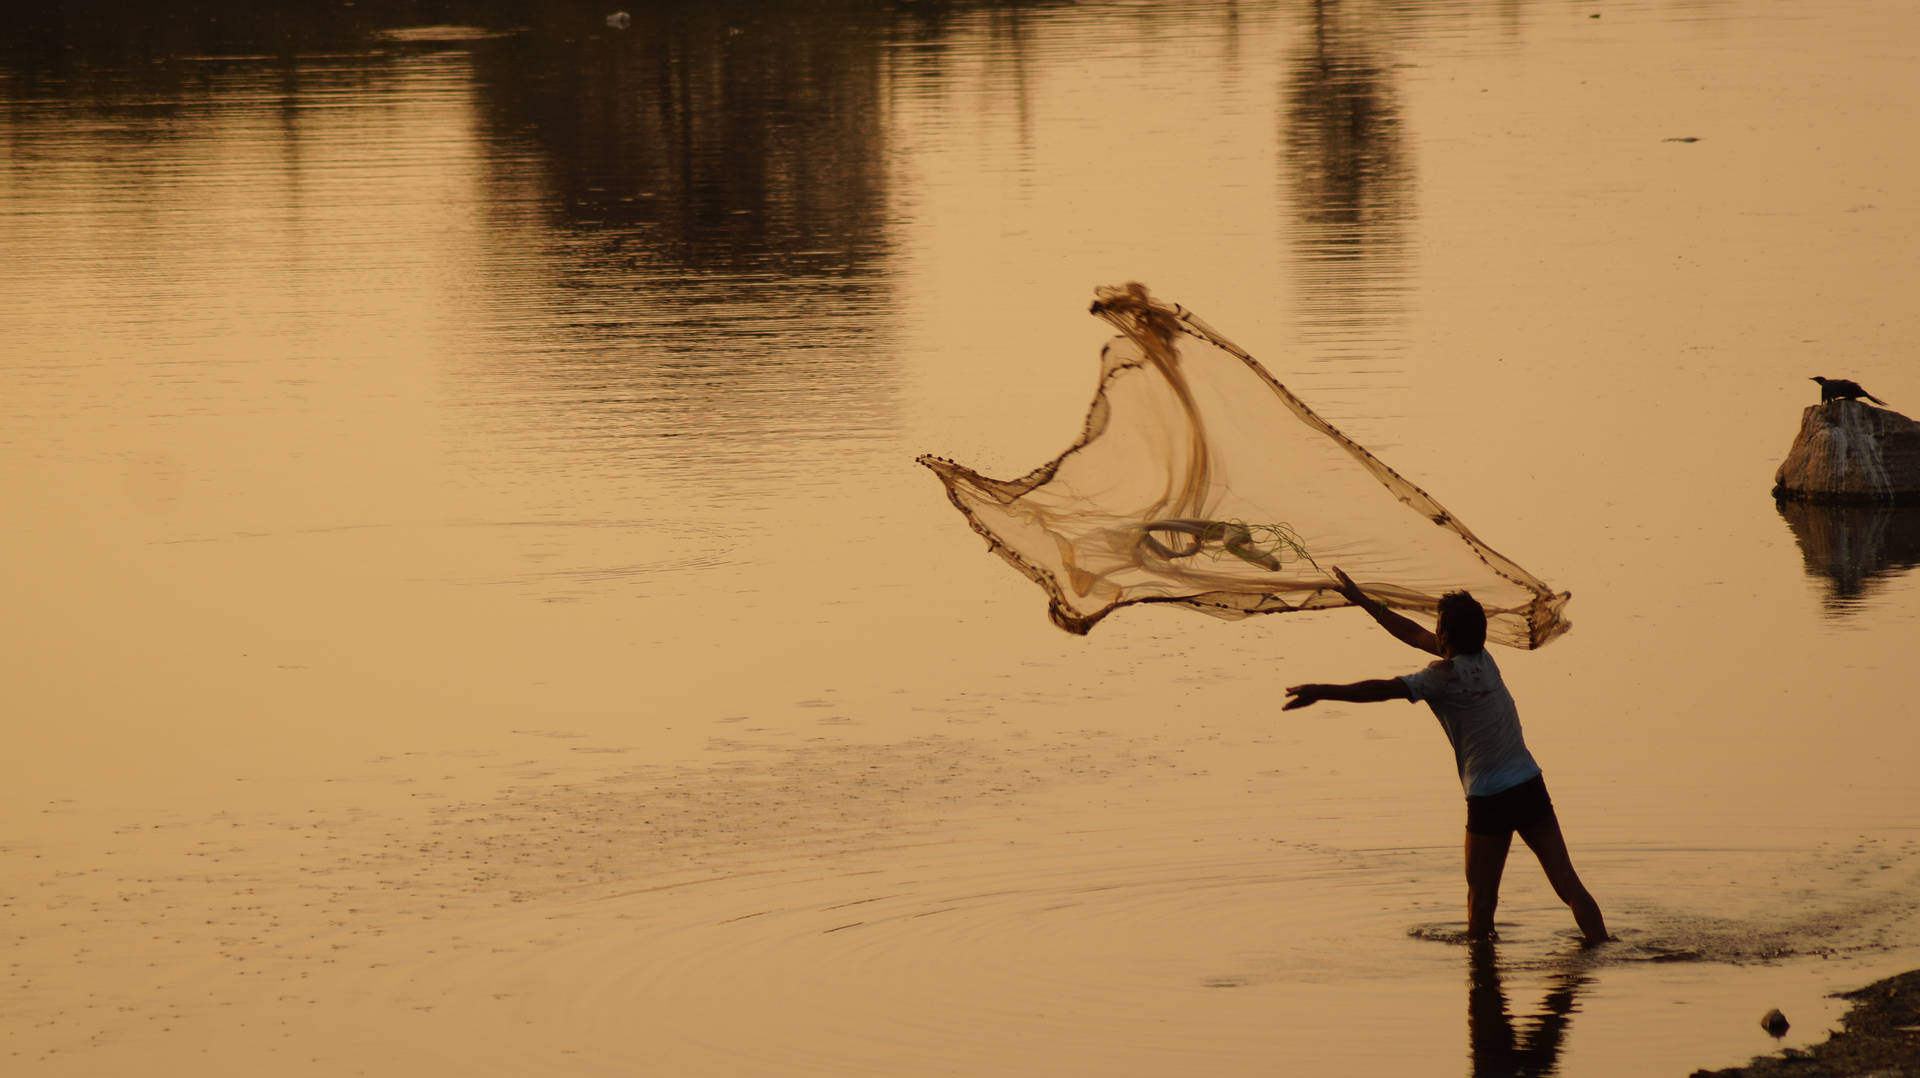 A man spreads a fishing net to haul in the morning's catch. Wallpaper